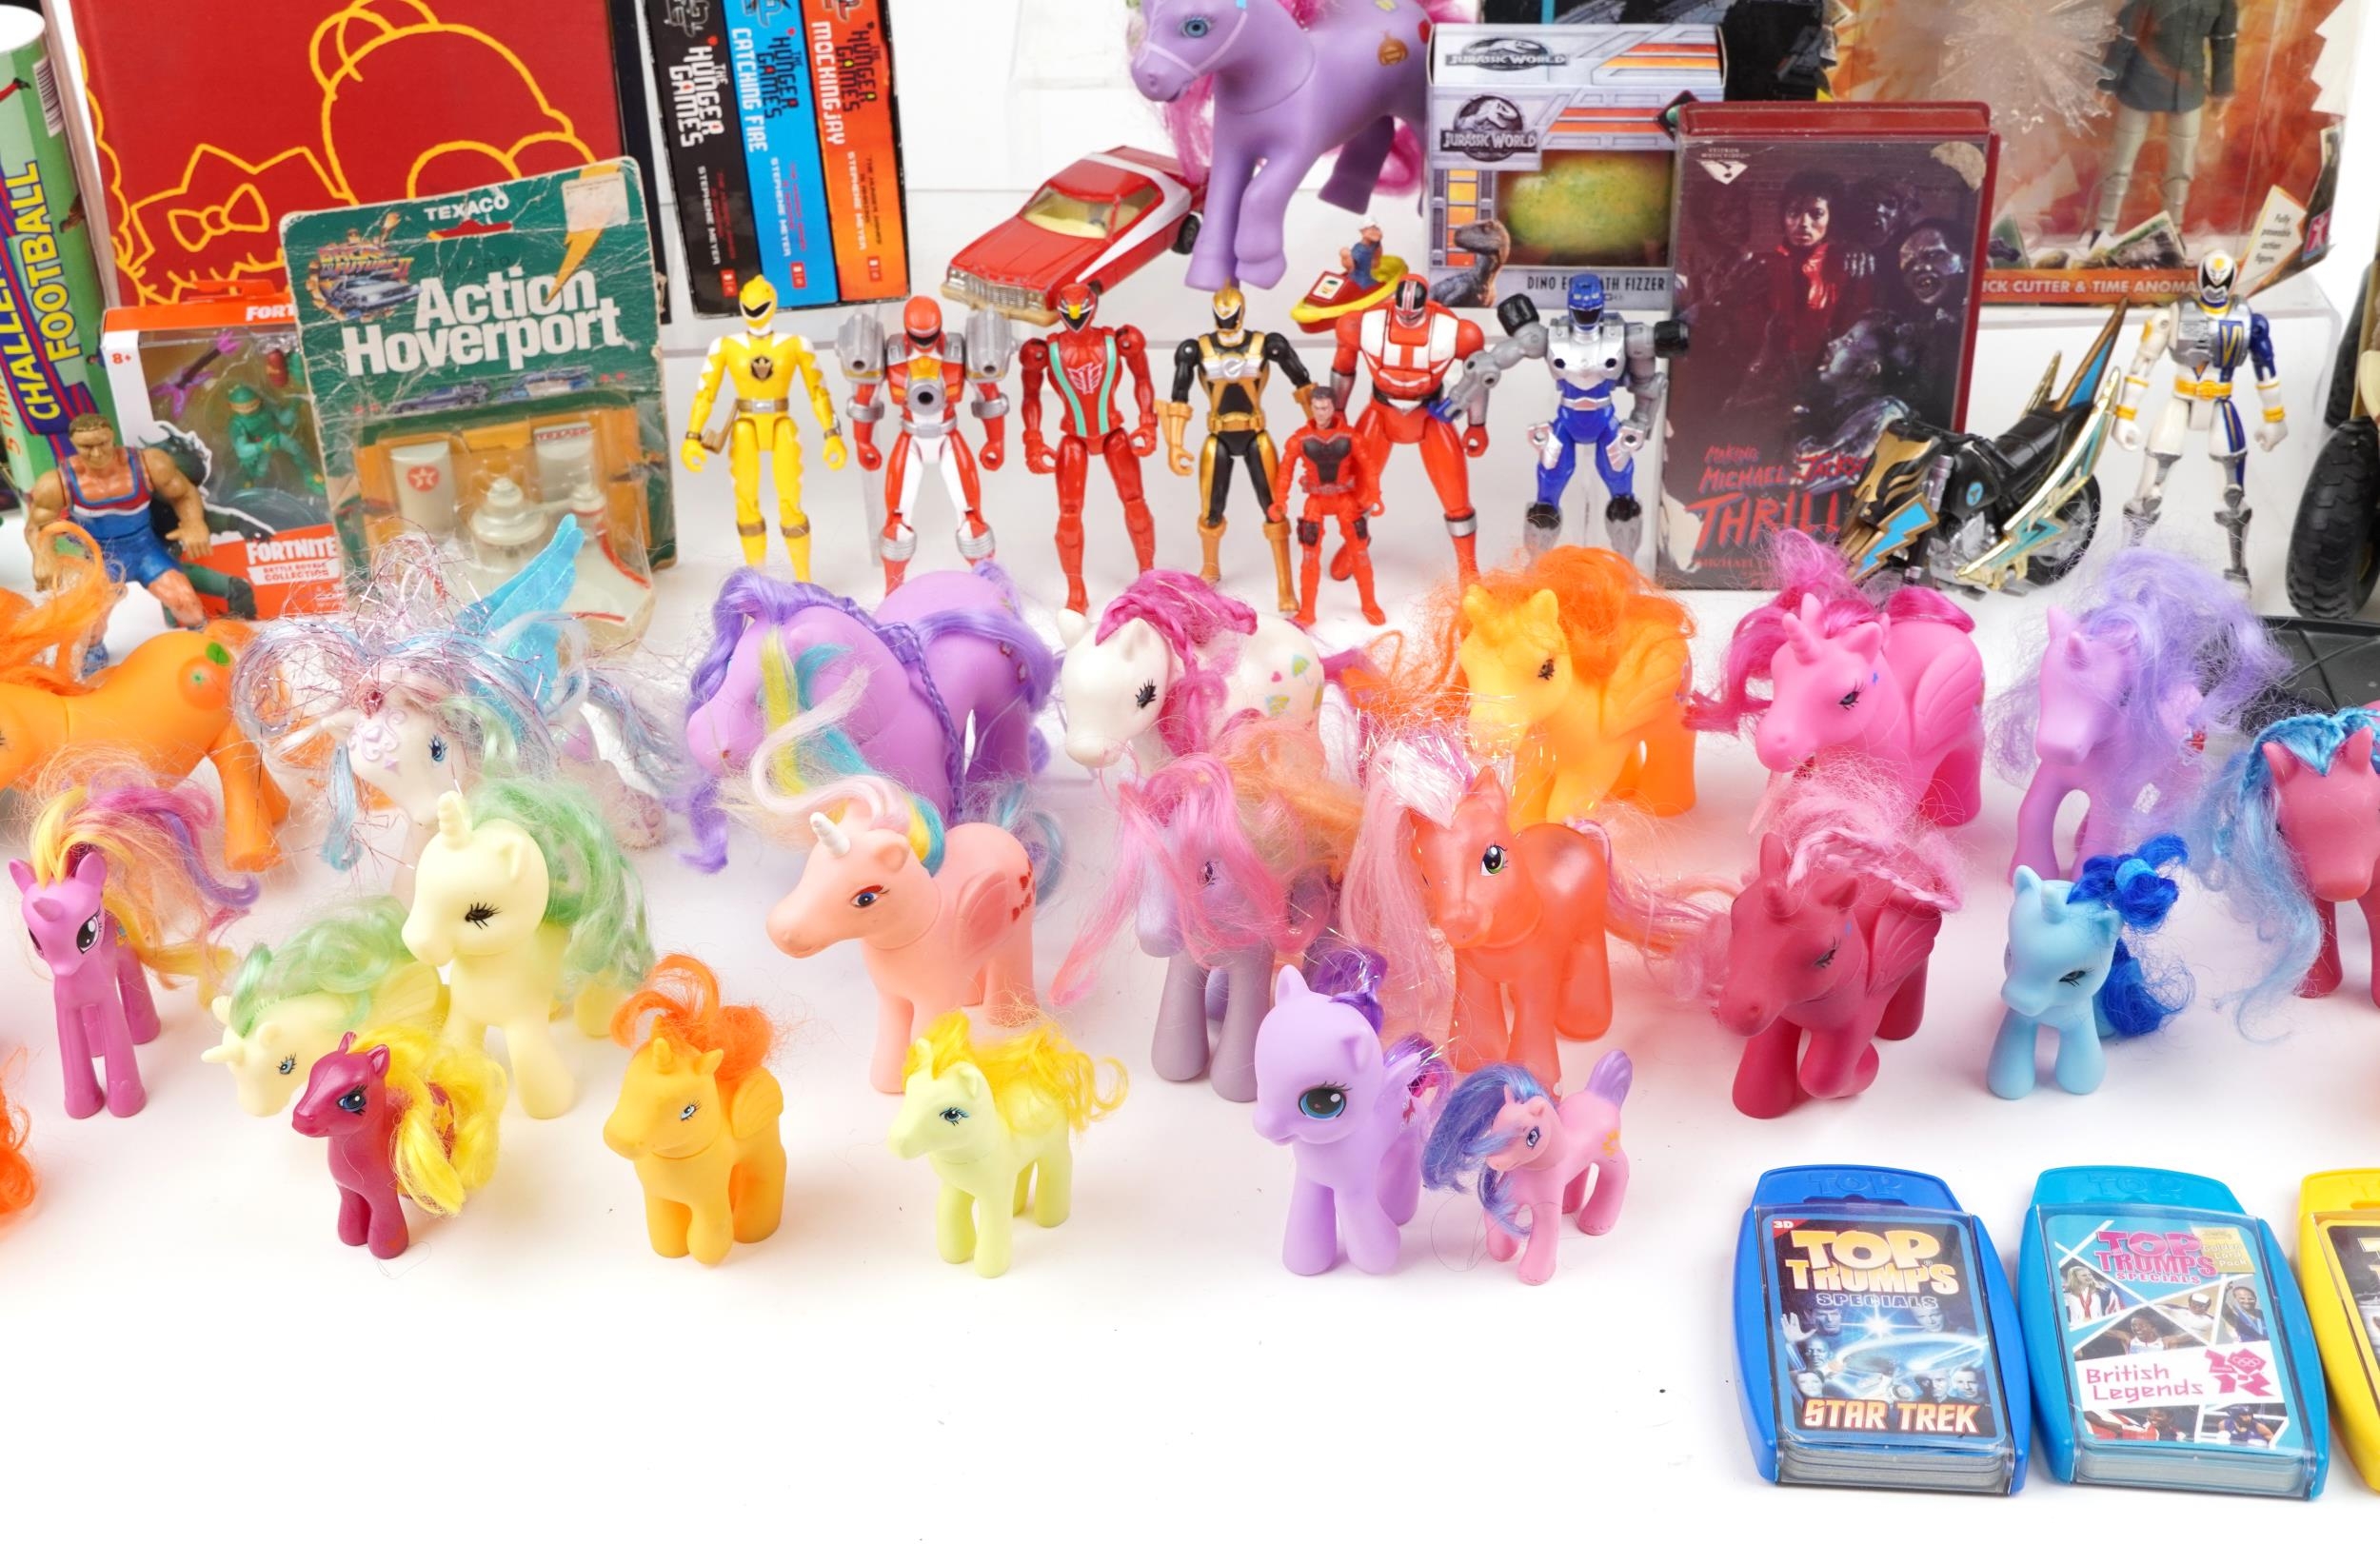 Vintage and later toys and related including My Little Ponies, Thunderbirds, Action Hover Port by - Image 5 of 6